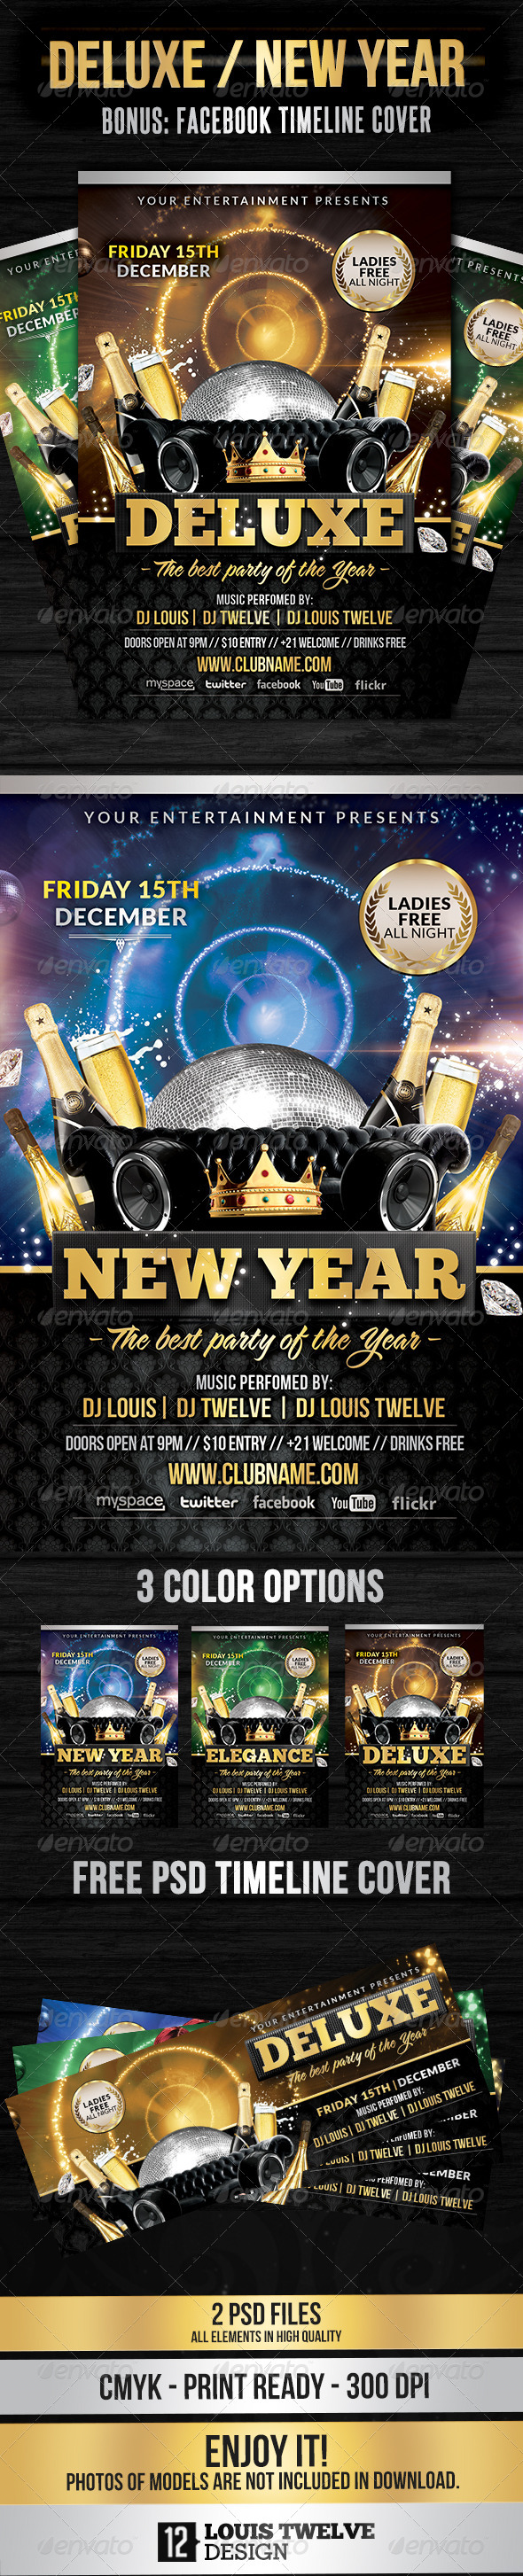 Deluxe / New Year | Flyer + FB Cover